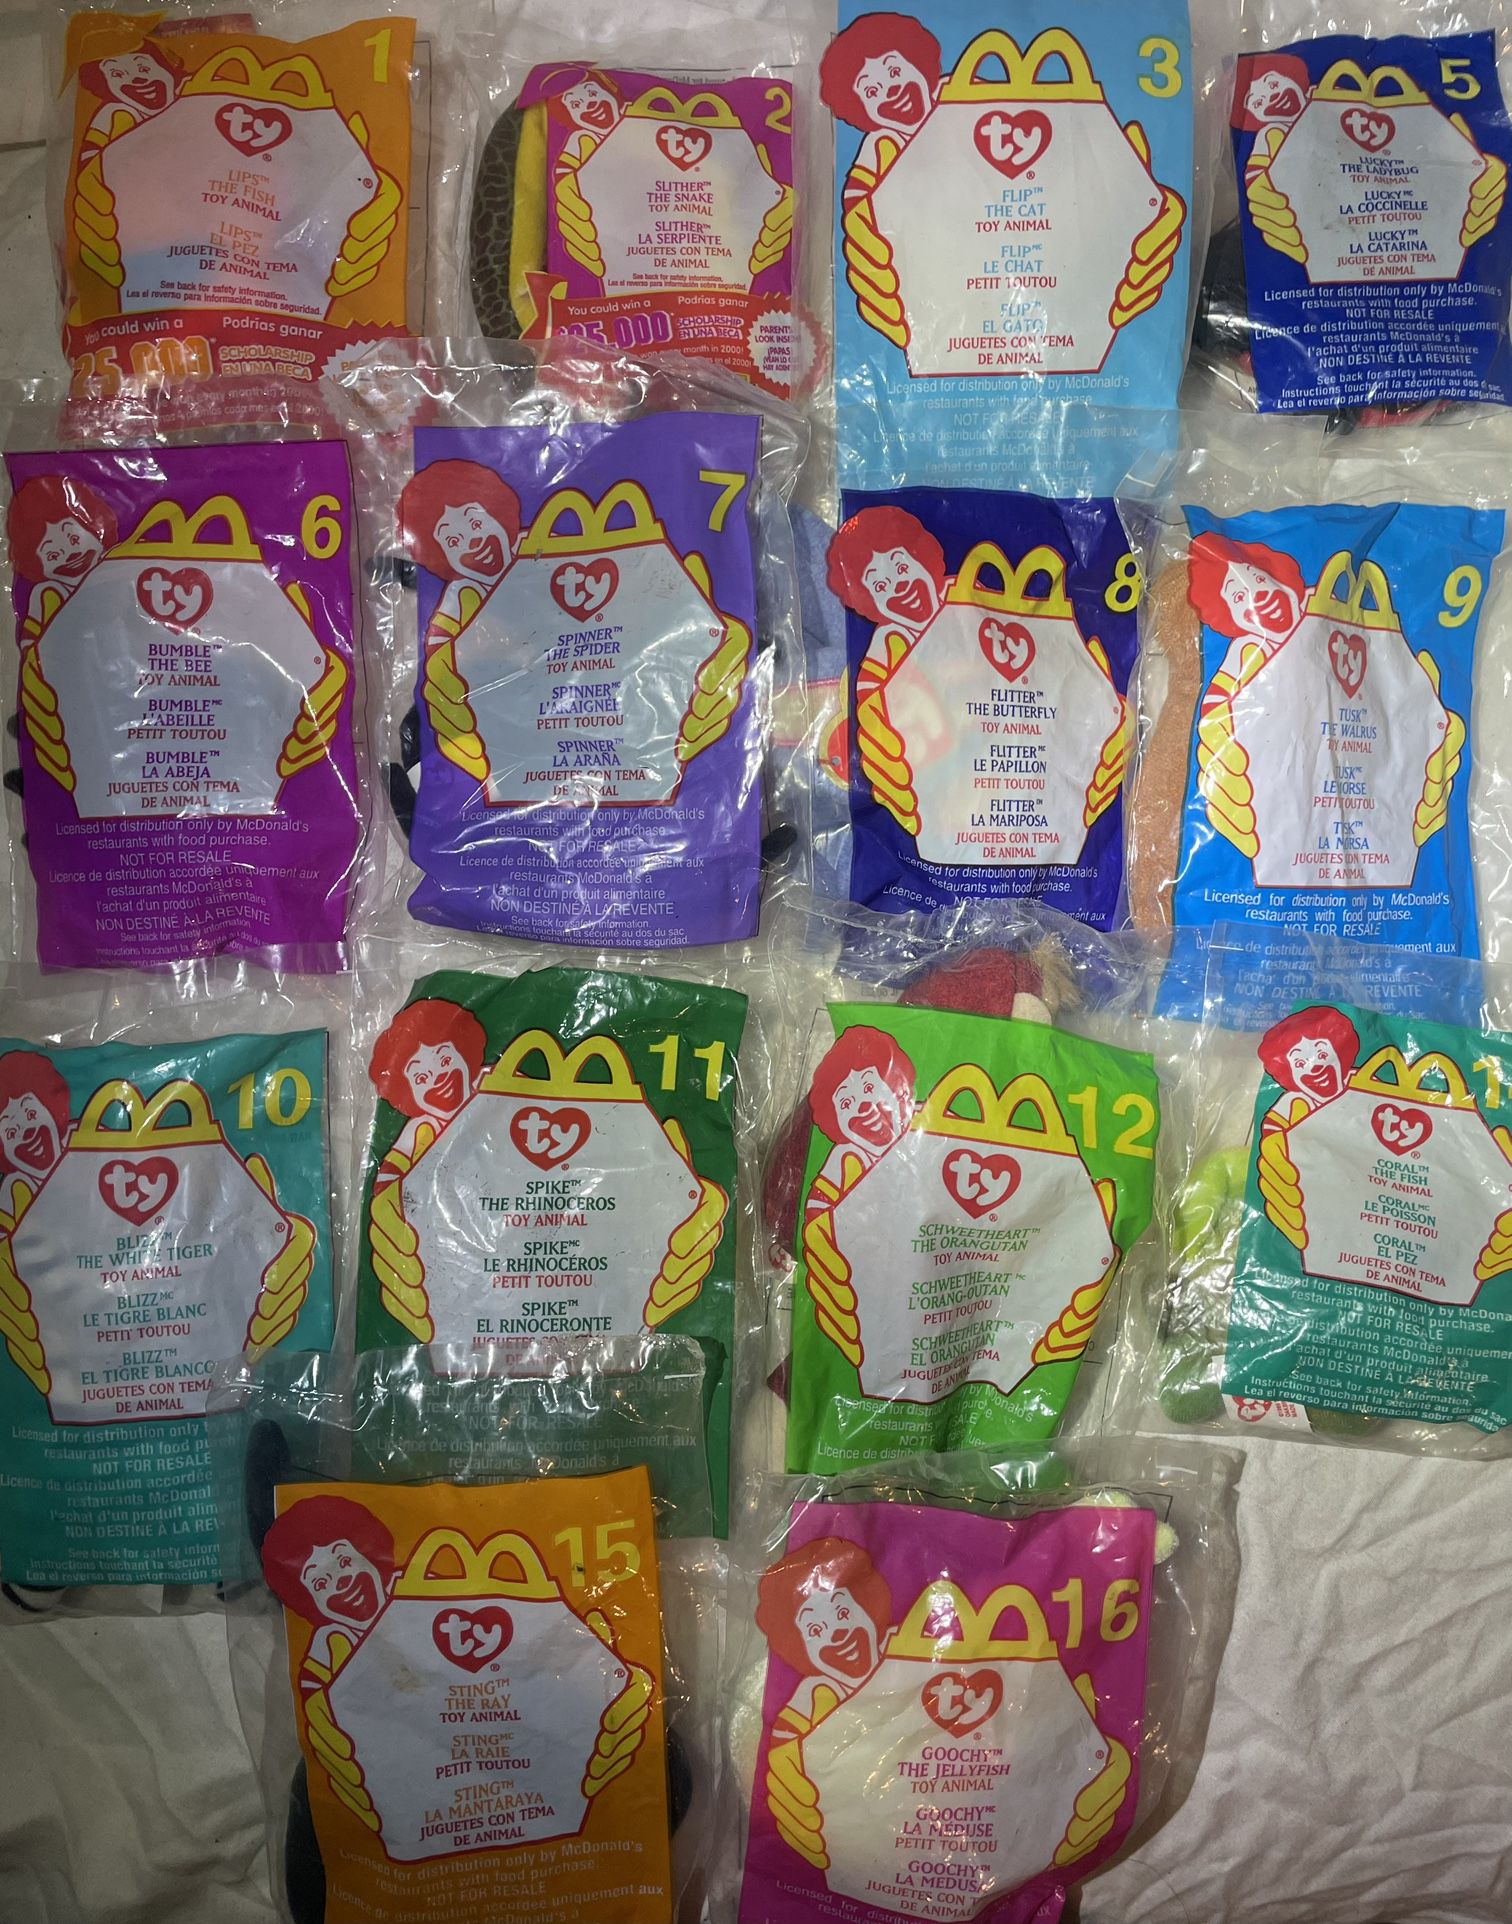 McDonald’s - Happy Meal Toy - Ty Beanie Babies - Collection #1 - #16 (2 Missing)